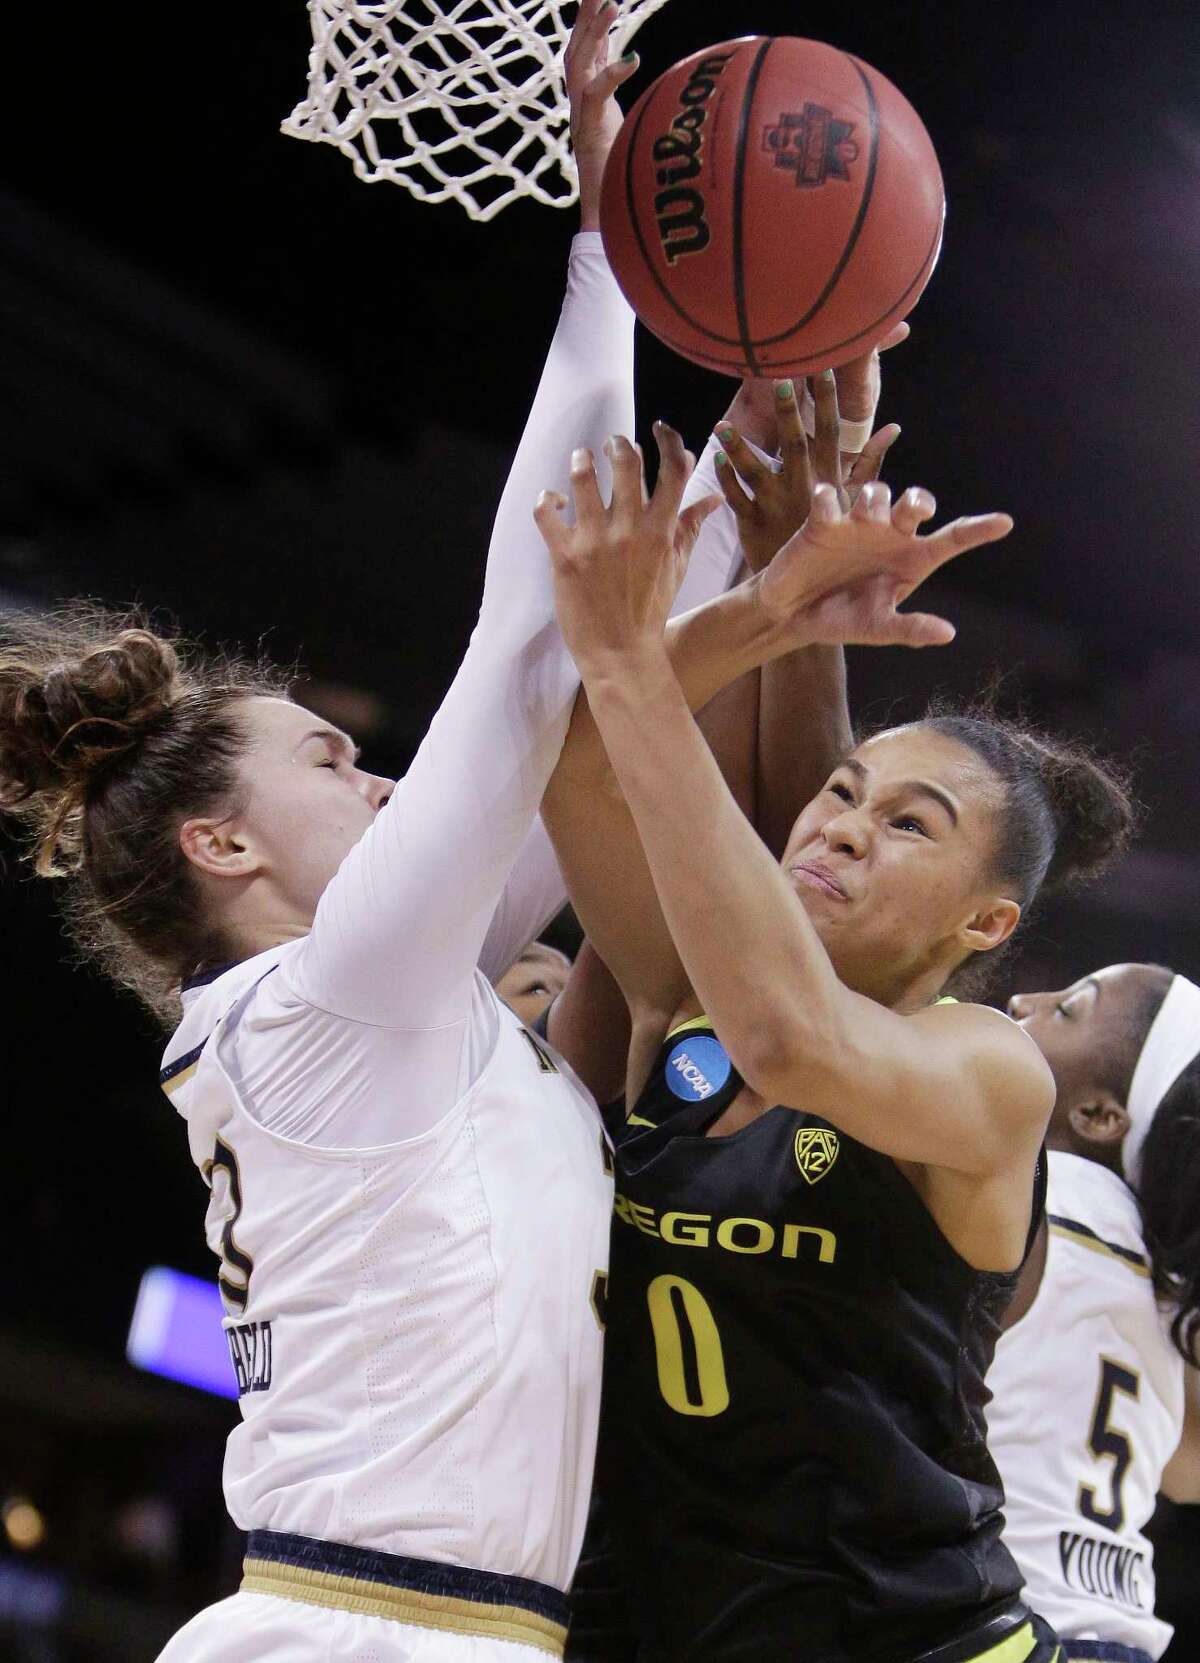 Oregon forward Satou Sabally (0) and Notre Dame forward Kathryn Westbeld go after a rebound during the first half in a regional final at the NCAA women's college basketball tournament, Monday, March 26, 2018, Spokane, Wash. (AP Photo/Young Kwak)